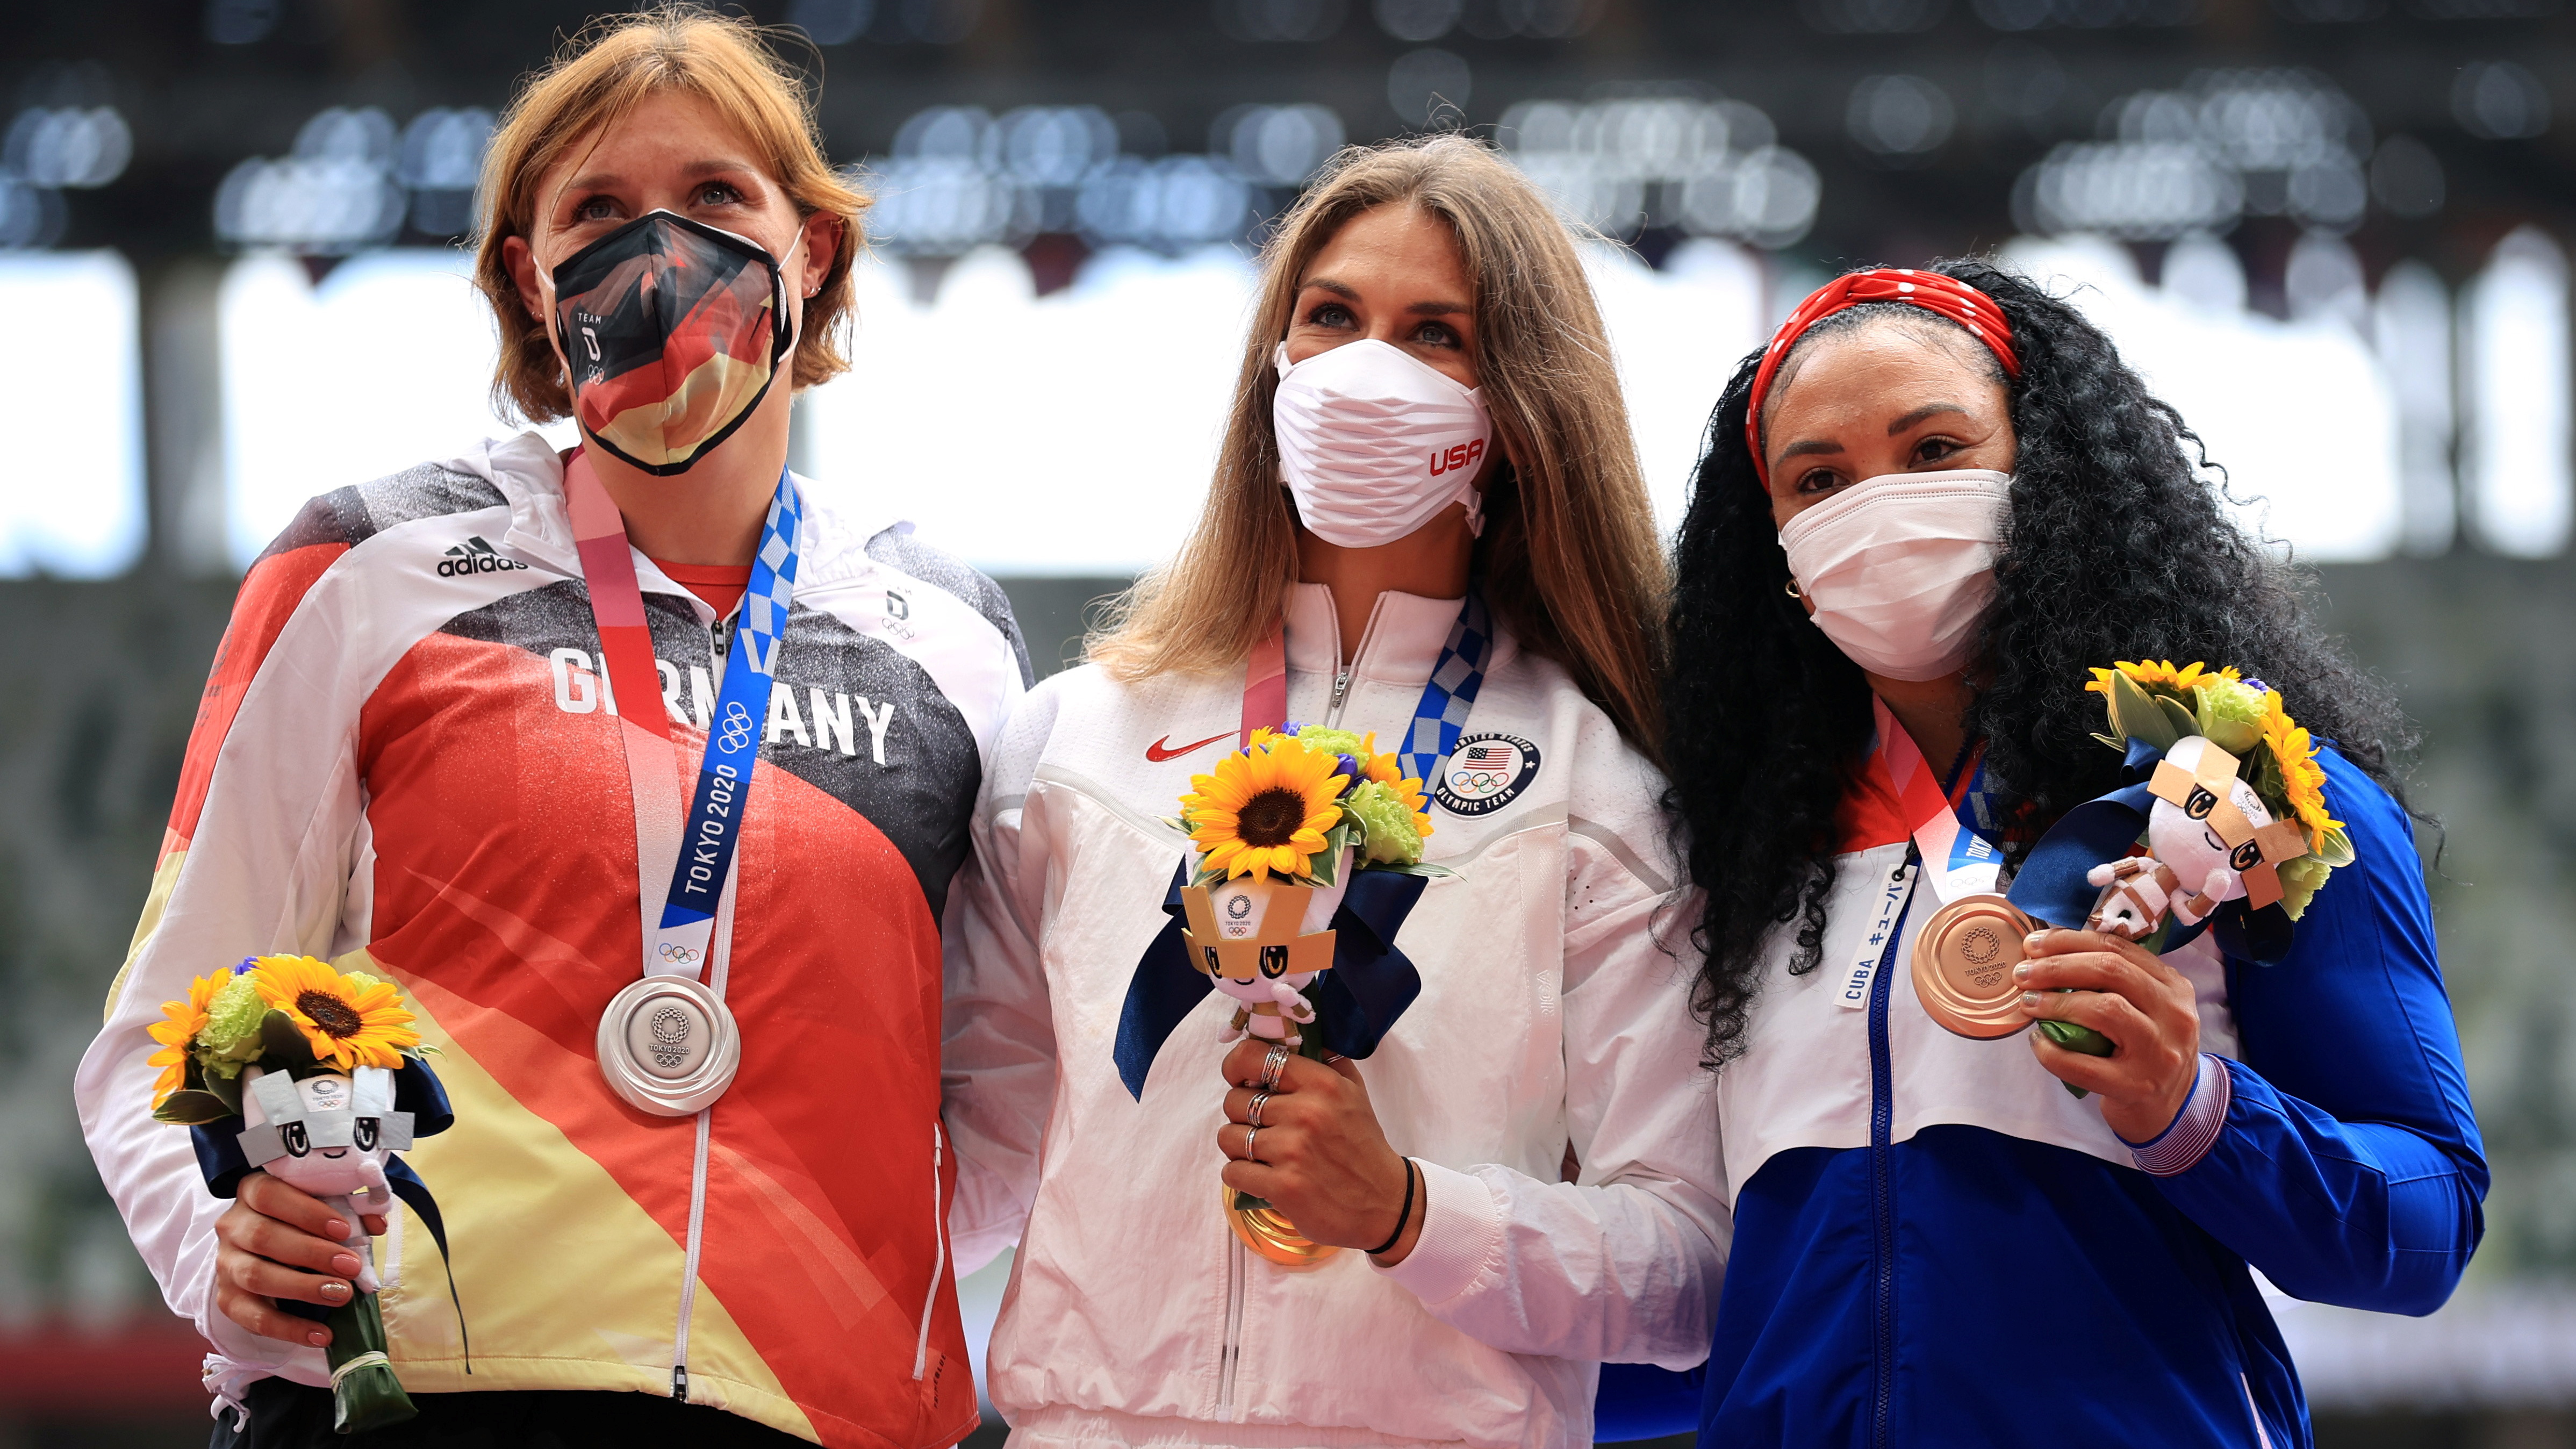 Tokyo 2020 Olympics - Athletics - Women's Discus Throw - Medal Ceremony - Olympic Stadium, Tokyo, Japan - August 3, 2021. Gold medallist, Valarie Allman of the United States poses on the podium with silver medallist, Kristin Pudenz of Germany and bronze medallist, Yaime Perez of Cuba as they all wear protective face masks REUTERS/Hannah Mckay